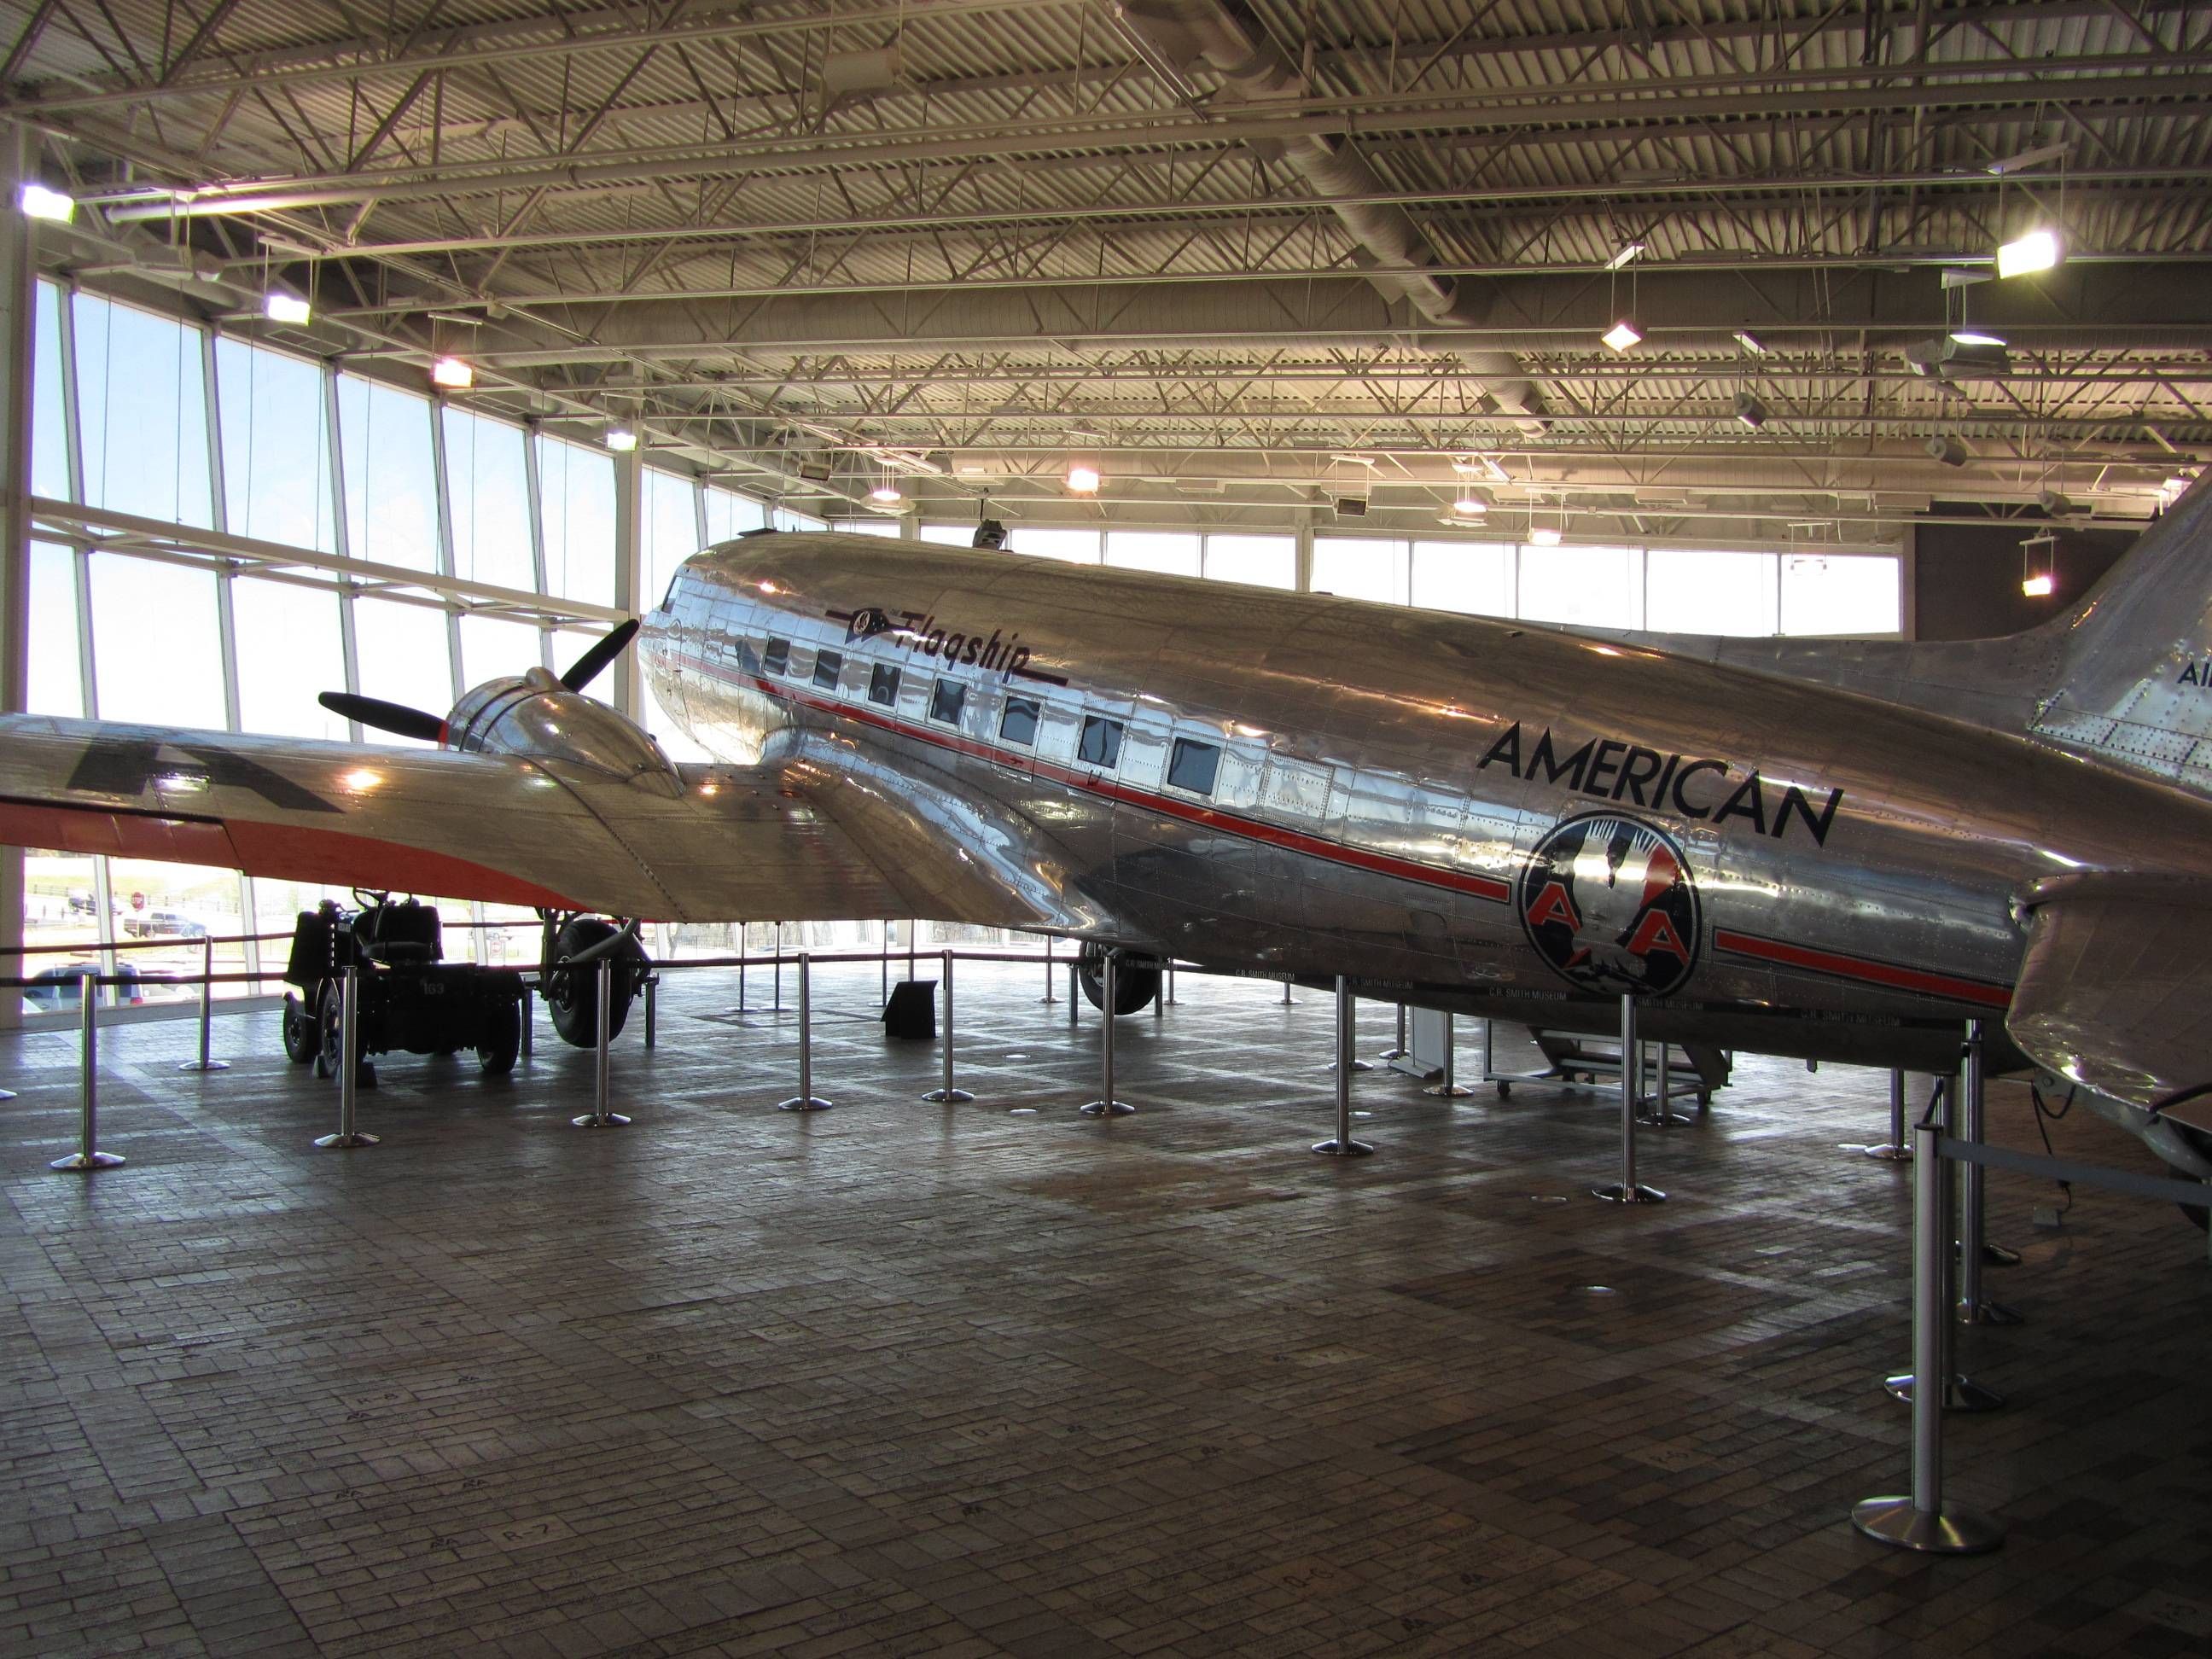 American Airlines CR Smith Museum